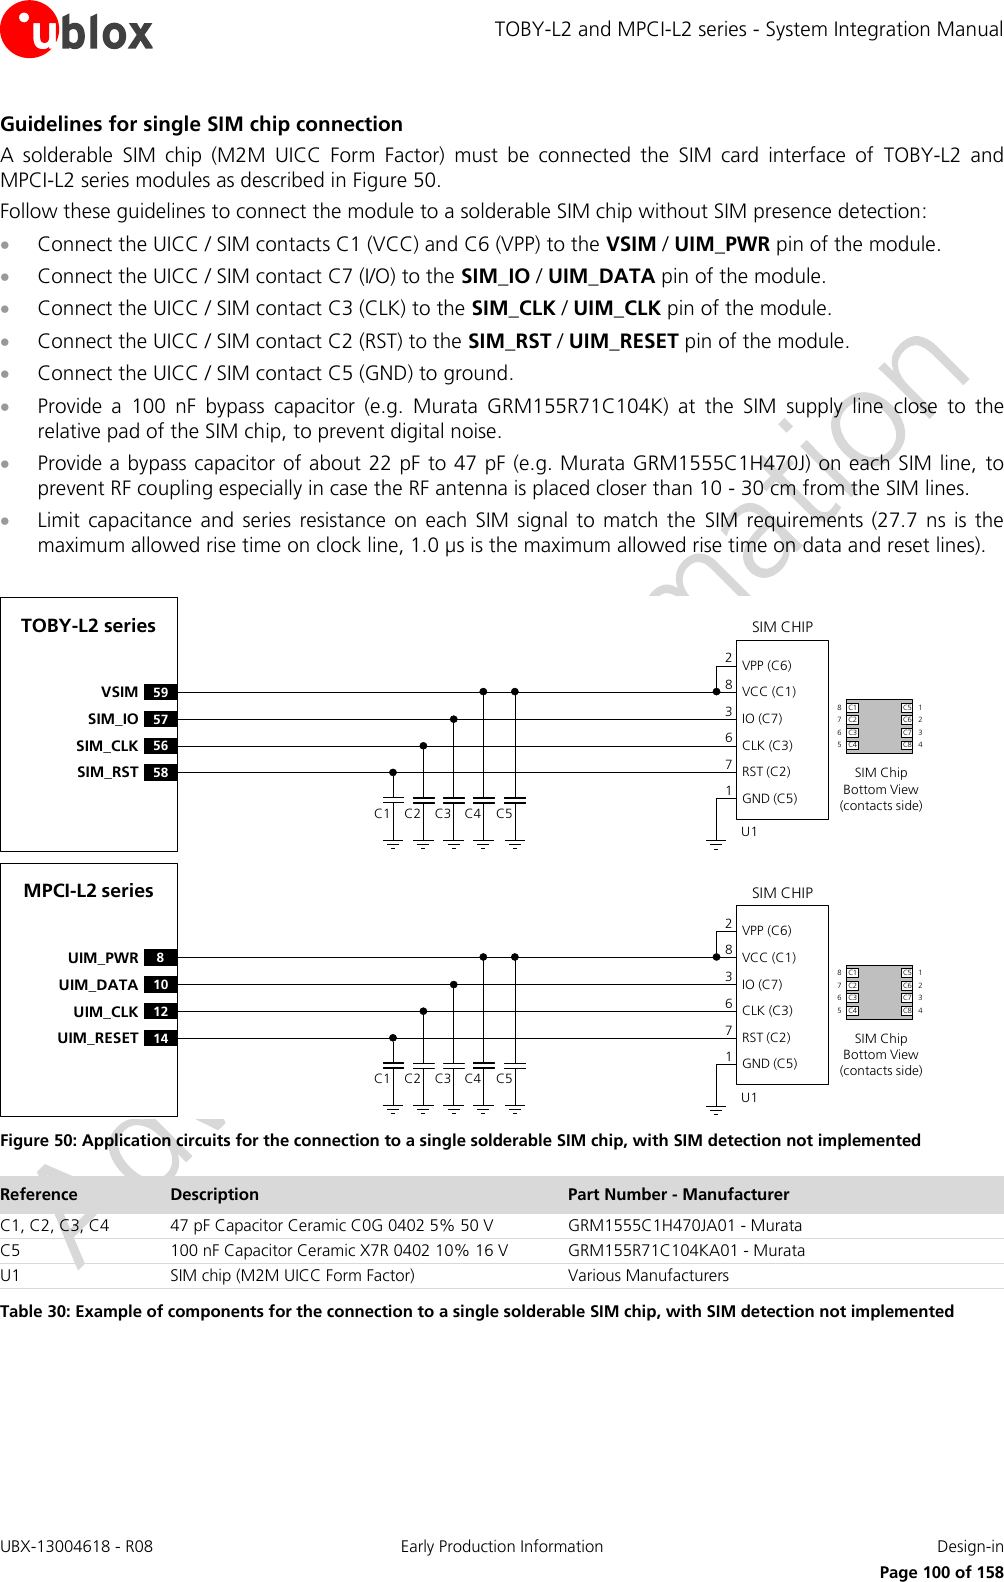 TOBY-L2 and MPCI-L2 series - System Integration Manual UBX-13004618 - R08  Early Production Information  Design-in     Page 100 of 158 Guidelines for single SIM chip connection A  solderable  SIM  chip  (M2M  UICC  Form  Factor)  must  be  connected  the  SIM  card  interface  of  TOBY-L2  and MPCI-L2 series modules as described in Figure 50. Follow these guidelines to connect the module to a solderable SIM chip without SIM presence detection:  Connect the UICC / SIM contacts C1 (VCC) and C6 (VPP) to the VSIM / UIM_PWR pin of the module.  Connect the UICC / SIM contact C7 (I/O) to the SIM_IO / UIM_DATA pin of the module.  Connect the UICC / SIM contact C3 (CLK) to the SIM_CLK / UIM_CLK pin of the module.  Connect the UICC / SIM contact C2 (RST) to the SIM_RST / UIM_RESET pin of the module.  Connect the UICC / SIM contact C5 (GND) to ground.  Provide  a  100  nF  bypass  capacitor  (e.g.  Murata  GRM155R71C104K)  at  the  SIM  supply  line  close  to  the relative pad of the SIM chip, to prevent digital noise.   Provide a bypass capacitor of about 22 pF to 47 pF (e.g. Murata GRM1555C1H470J) on each SIM line,  to prevent RF coupling especially in case the RF antenna is placed closer than 10 - 30 cm from the SIM lines.  Limit capacitance  and  series  resistance  on each  SIM  signal to match  the  SIM requirements (27.7  ns  is  the maximum allowed rise time on clock line, 1.0 µs is the maximum allowed rise time on data and reset lines).  TOBY-L2 series59VSIM57SIM_IO56SIM_CLK58SIM_RSTSIM CHIPSIM ChipBottom View (contacts side)C1VPP (C6)VCC (C1)IO (C7)CLK (C3)RST (C2)GND (C5)C2 C3 C5U1C4283671C1 C5C2 C6C3 C7C4 C887651234MPCI-L2 series8UIM_PWR10UIM_DATA12UIM_CLK14UIM_RESETSIM CHIPSIM ChipBottom View (contacts side)C1VPP (C6)VCC (C1)IO (C7)CLK (C3)RST (C2)GND (C5)C2 C3 C5U1C4283671C1 C5C2 C6C3 C7C4 C887651234 Figure 50: Application circuits for the connection to a single solderable SIM chip, with SIM detection not implemented Reference Description Part Number - Manufacturer C1, C2, C3, C4 47 pF Capacitor Ceramic C0G 0402 5% 50 V GRM1555C1H470JA01 - Murata C5 100 nF Capacitor Ceramic X7R 0402 10% 16 V GRM155R71C104KA01 - Murata U1 SIM chip (M2M UICC Form Factor) Various Manufacturers Table 30: Example of components for the connection to a single solderable SIM chip, with SIM detection not implemented  